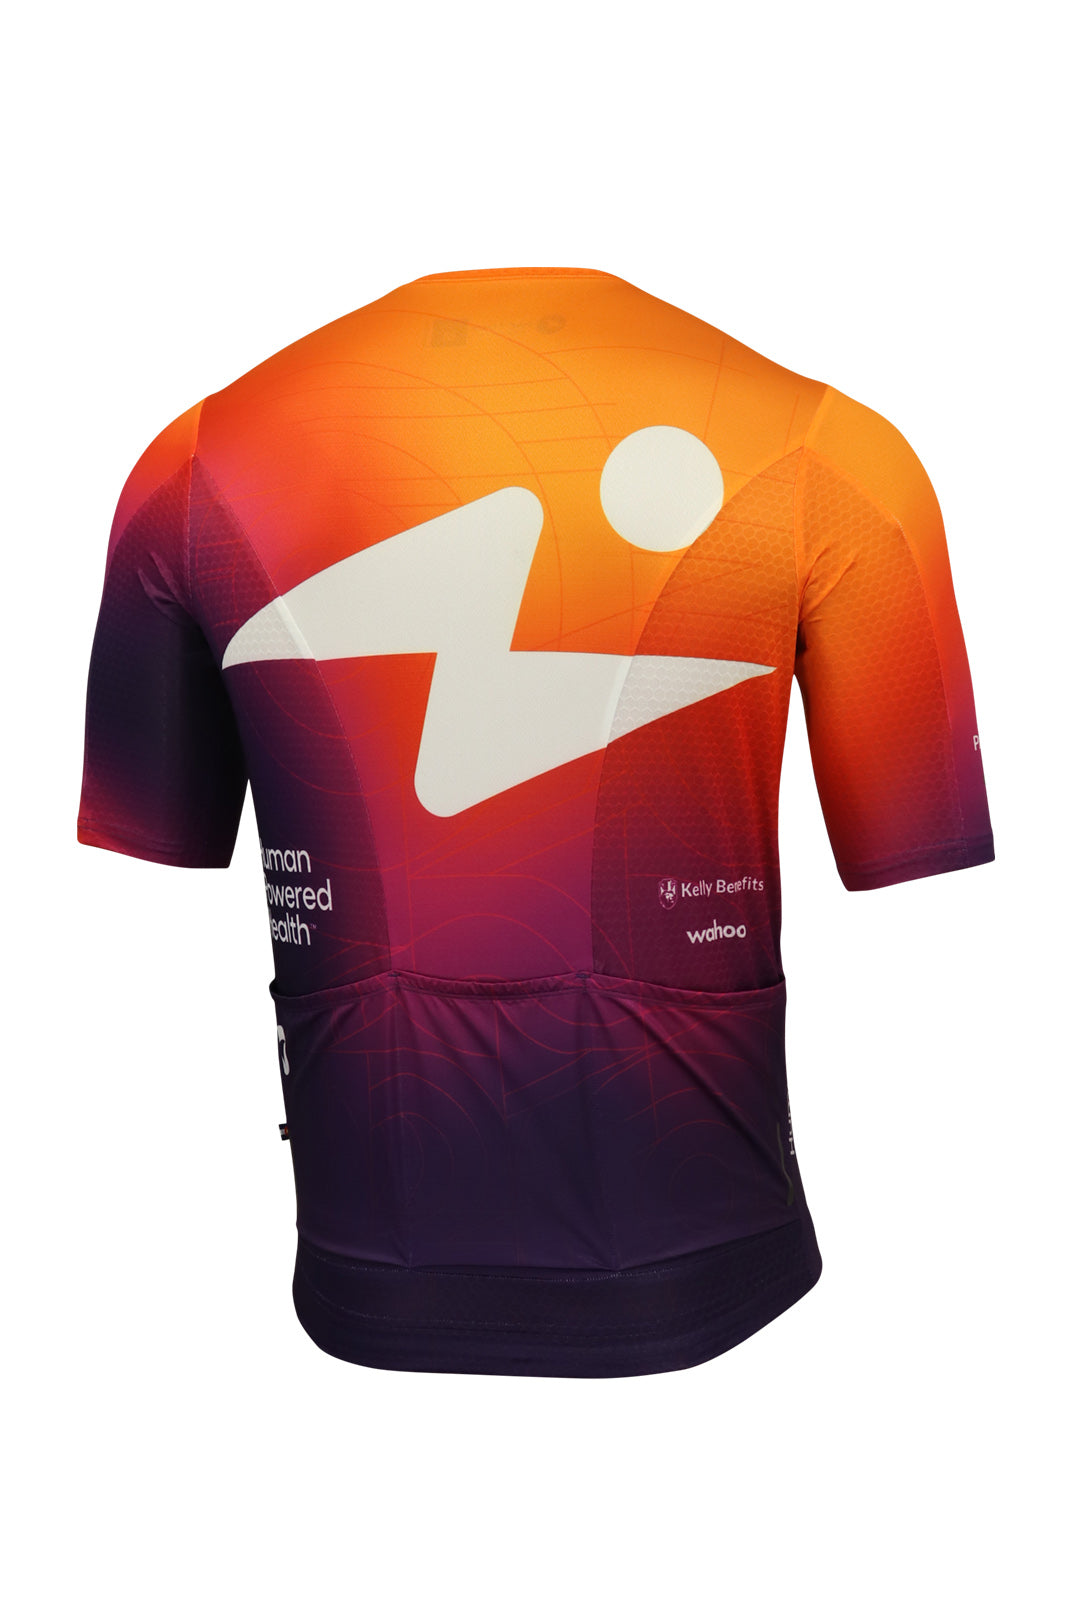 Zwift Rapha men's TOUR FOR ALL JERSEY XS